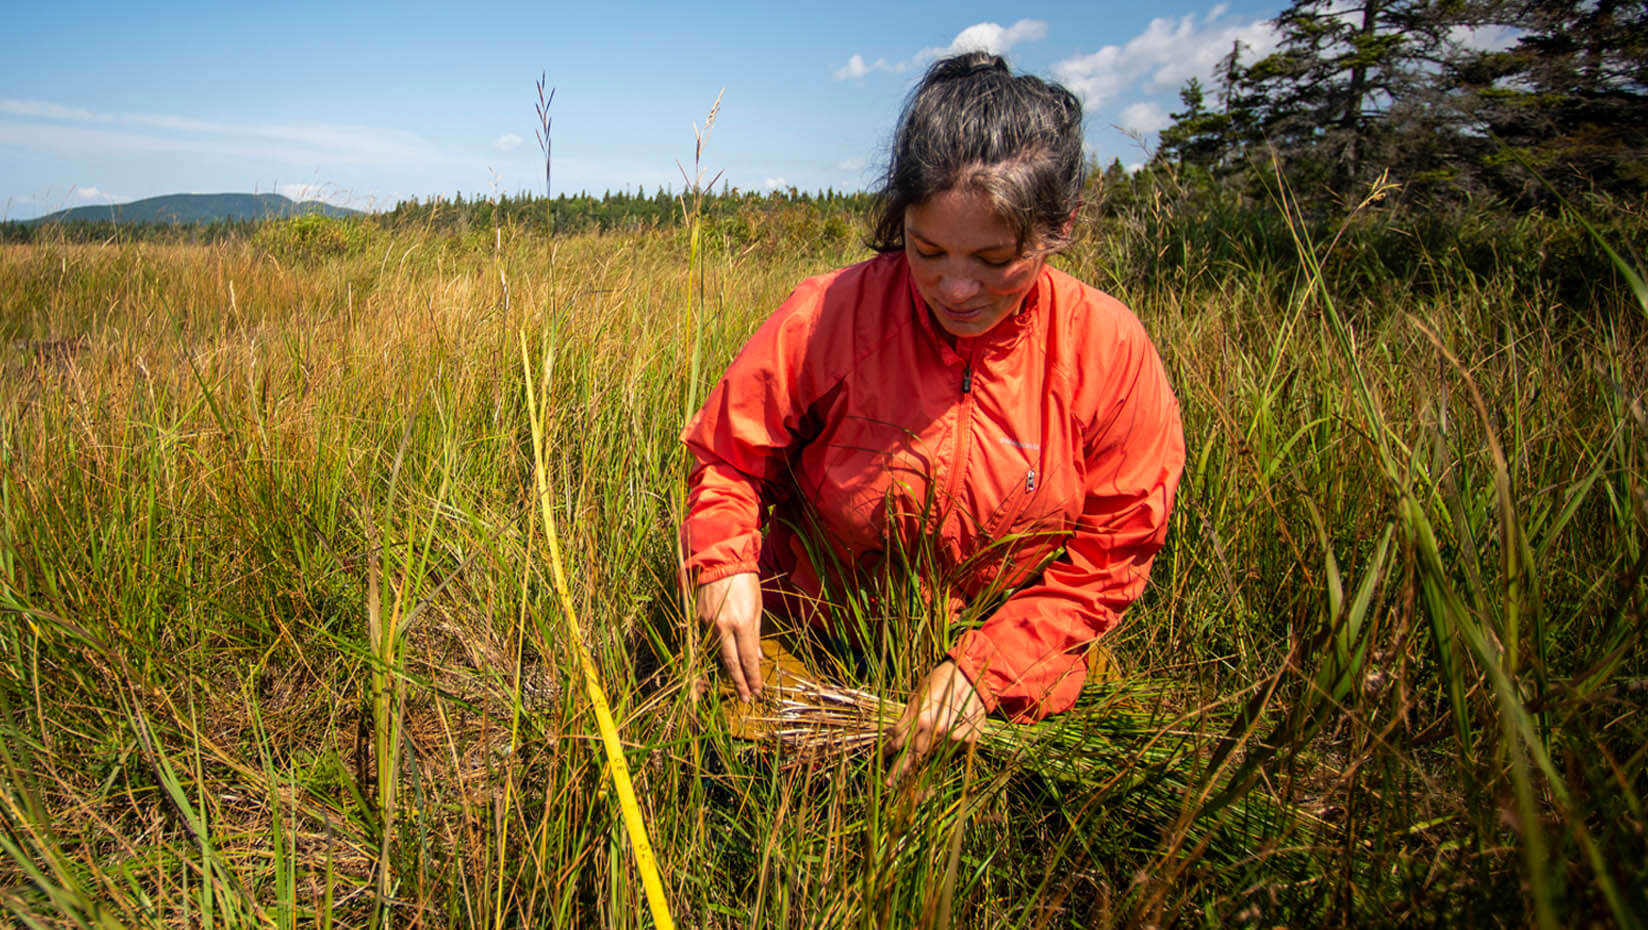 A woman gathers sweetgrass in a field